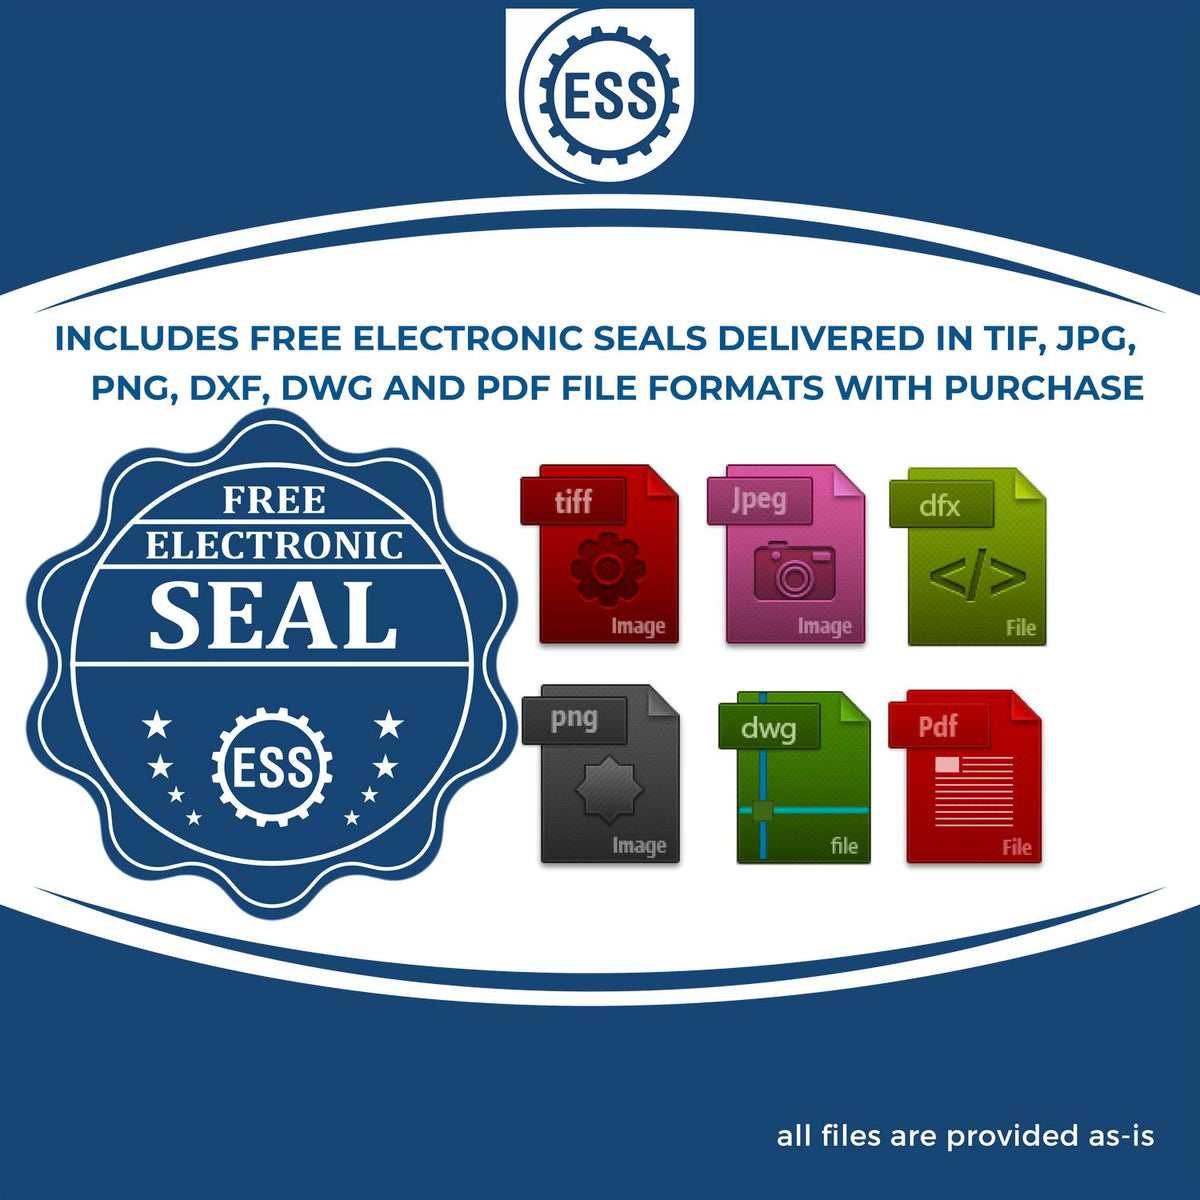 An infographic for the free electronic seal for the Gift Vermont Landscape Architect Seal illustrating the different file type icons such as DXF, DWG, TIF, JPG and PNG.